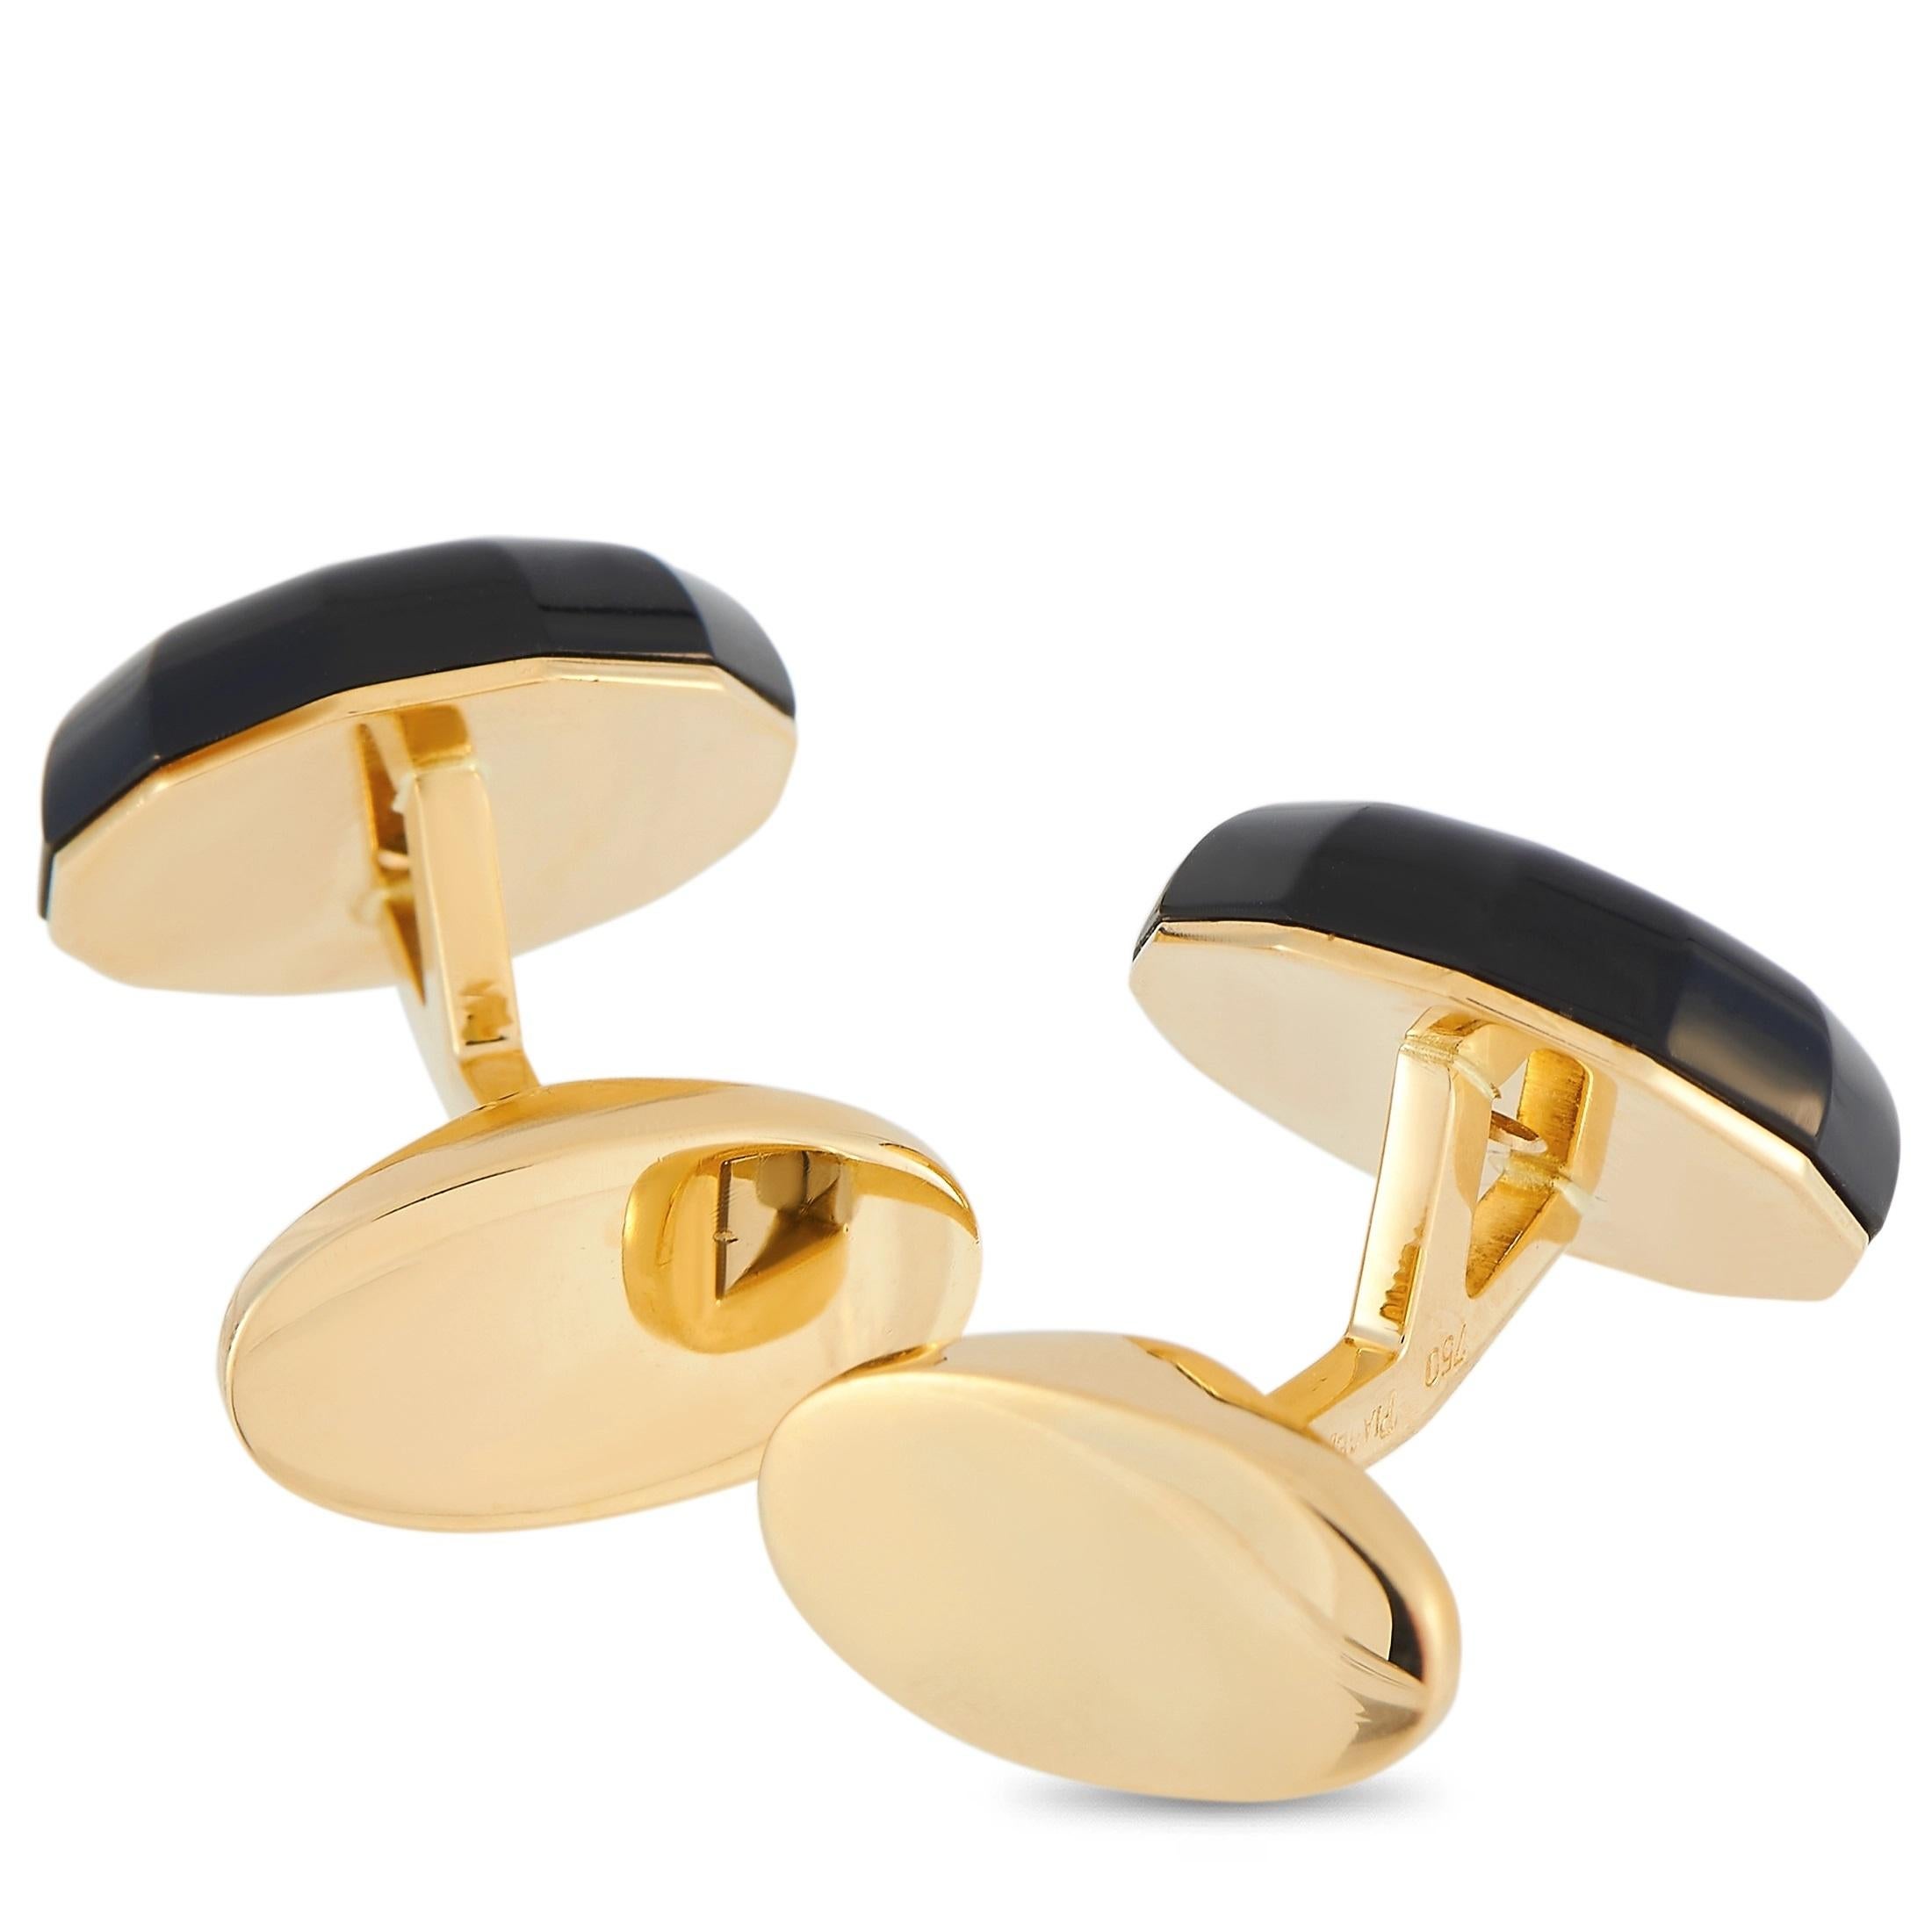 These Piaget 18K Yellow Gold Diamond and Onyx Cufflinks are sure to impress. The cufflinks are made with 18K Yellow Gold and topped with a polished onyx stone. The center of each cufflink is set with a single round cut diamond. The cufflinks measure